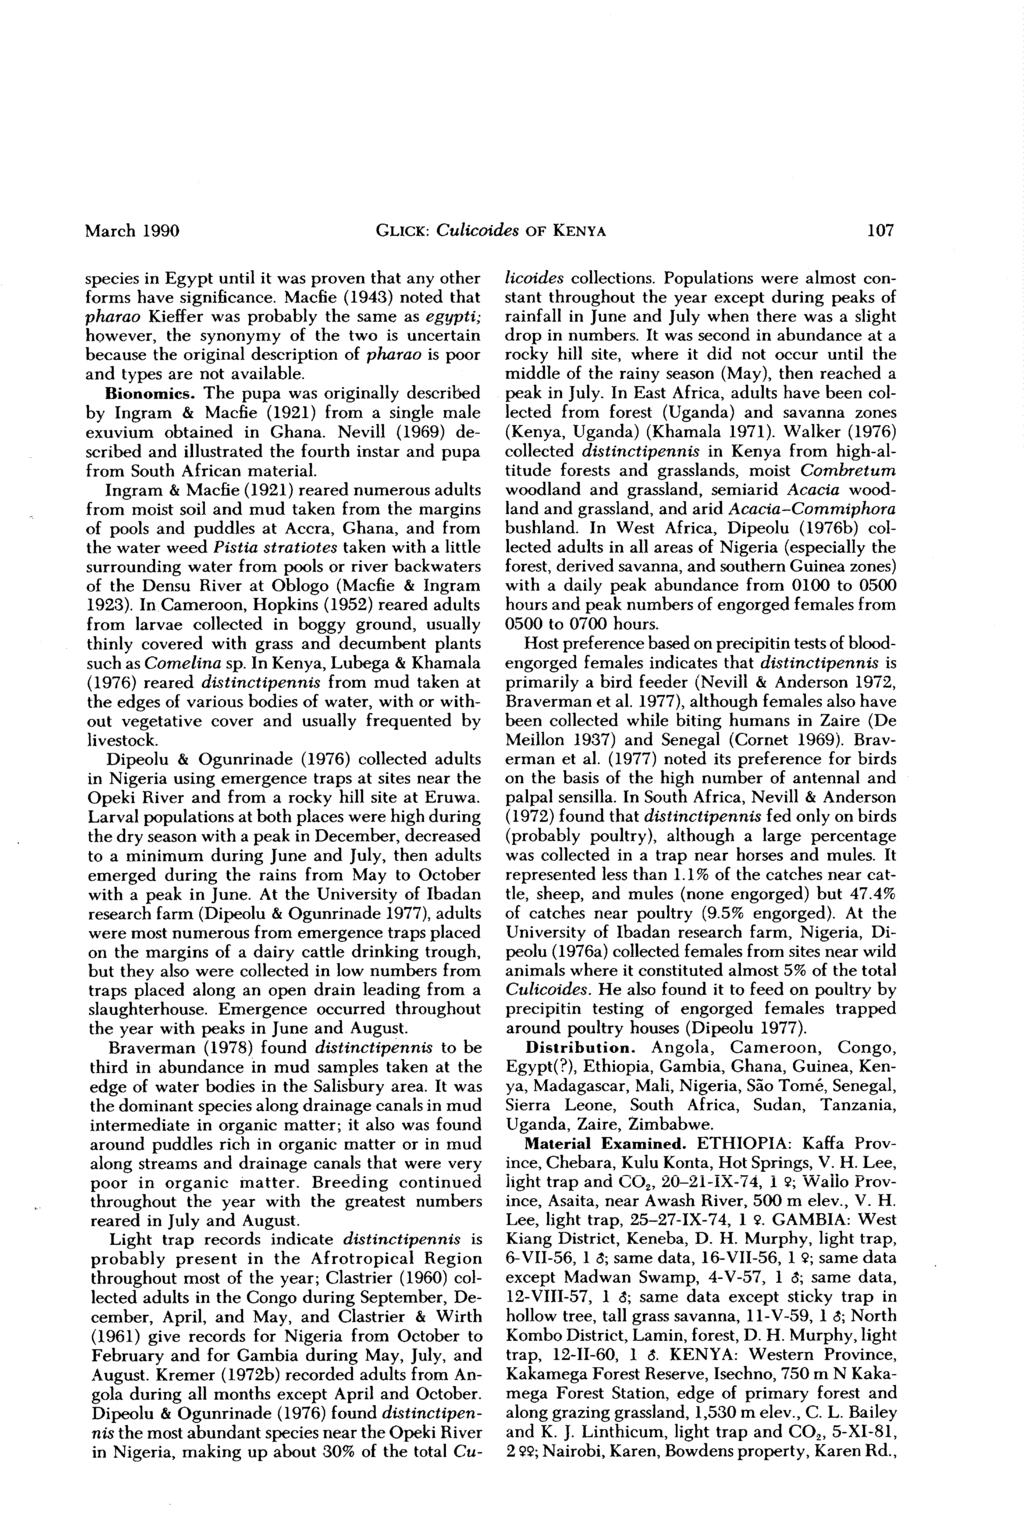 March 1990 GLICK: Culicoides OF KENYA 107 species in Egypt until it was proven that any other forms have significance.